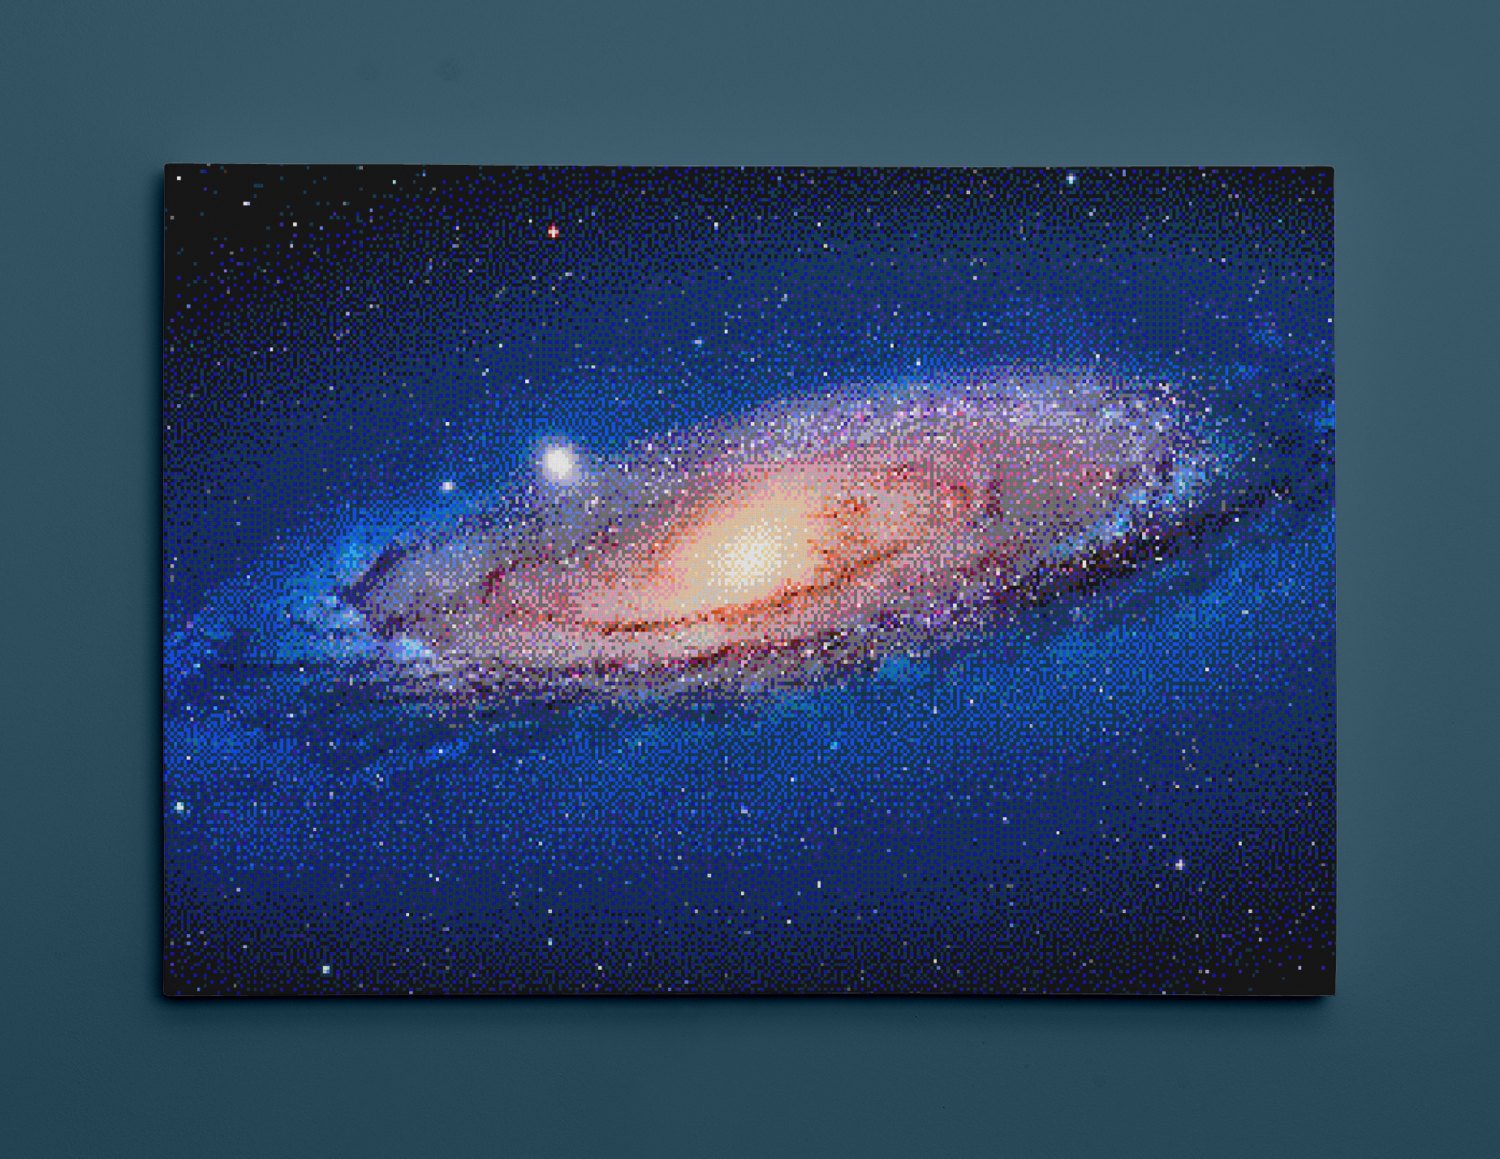 The Andromeda Galaxy for NES, Pixel Art (12" x 18") - Canvas Wrap Print